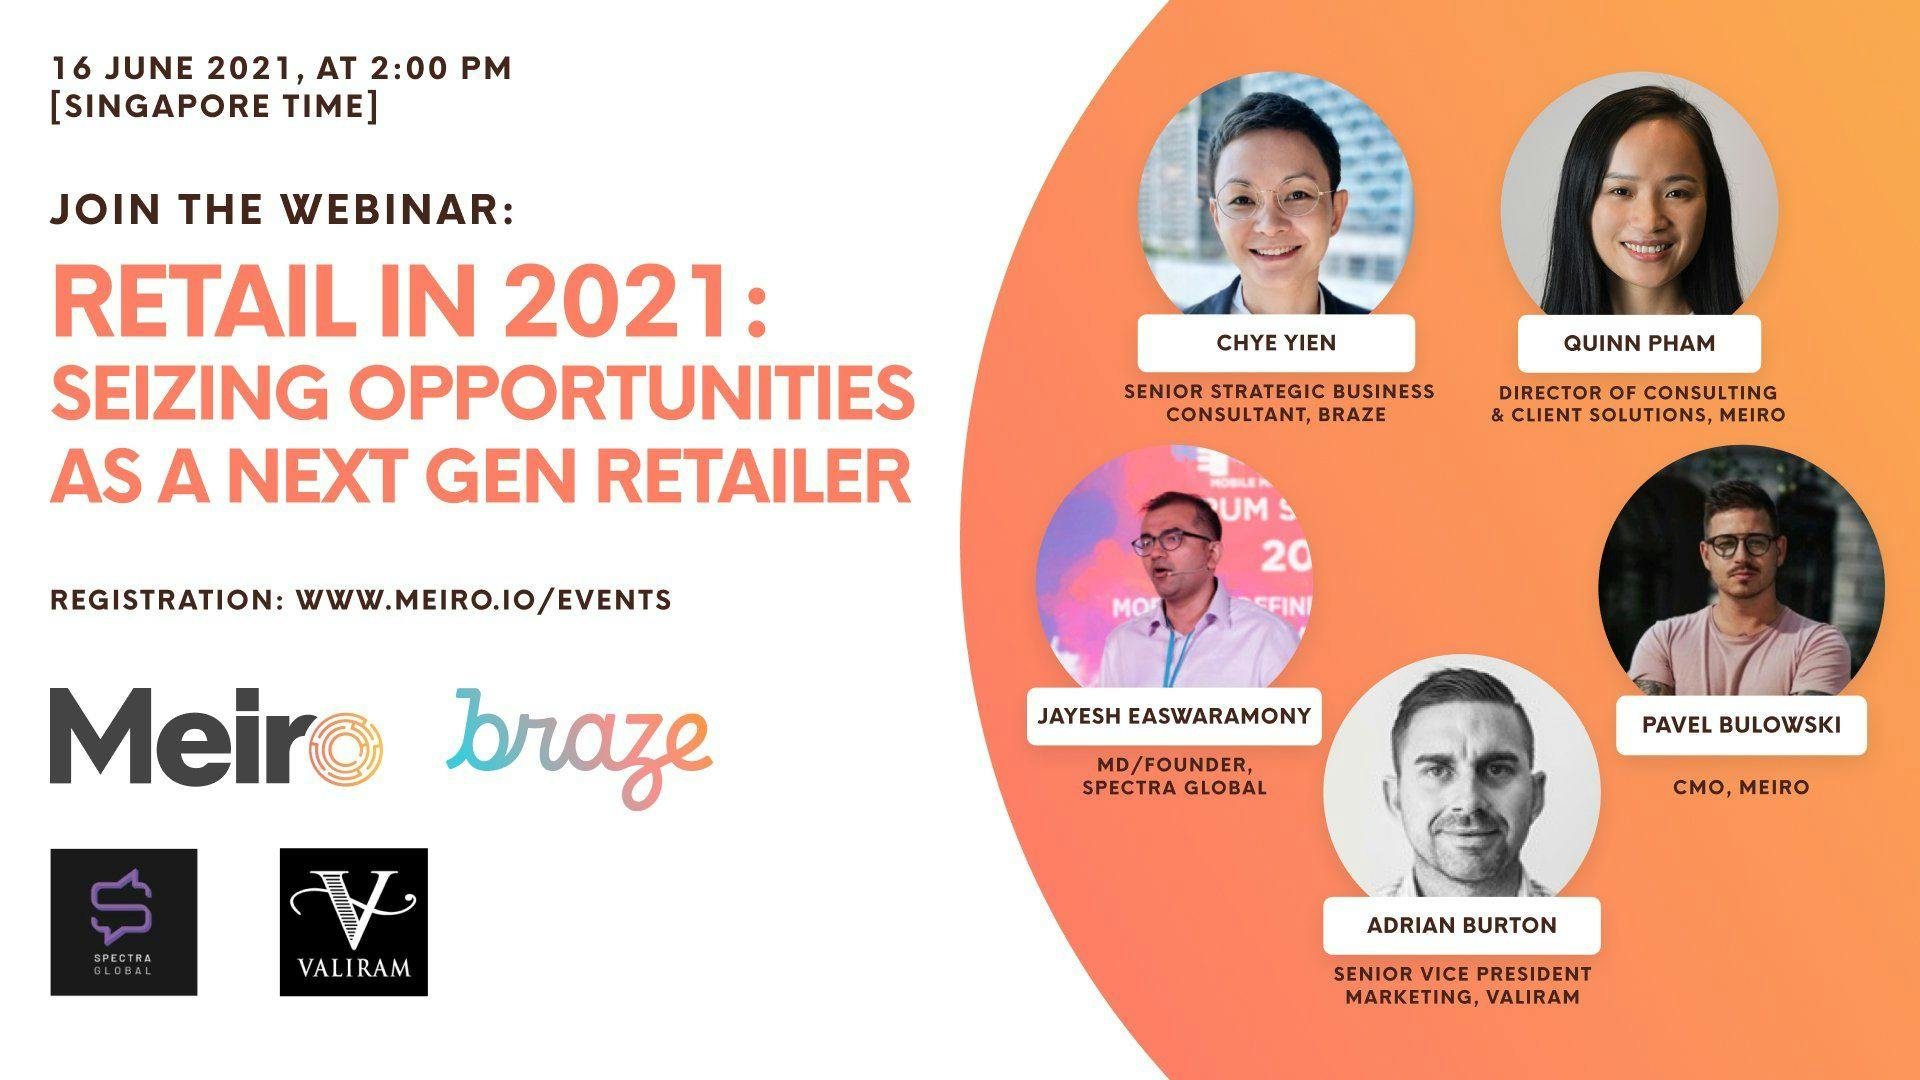 Retail in 2021: Seizing opportunities as a next gen retailer featured-image